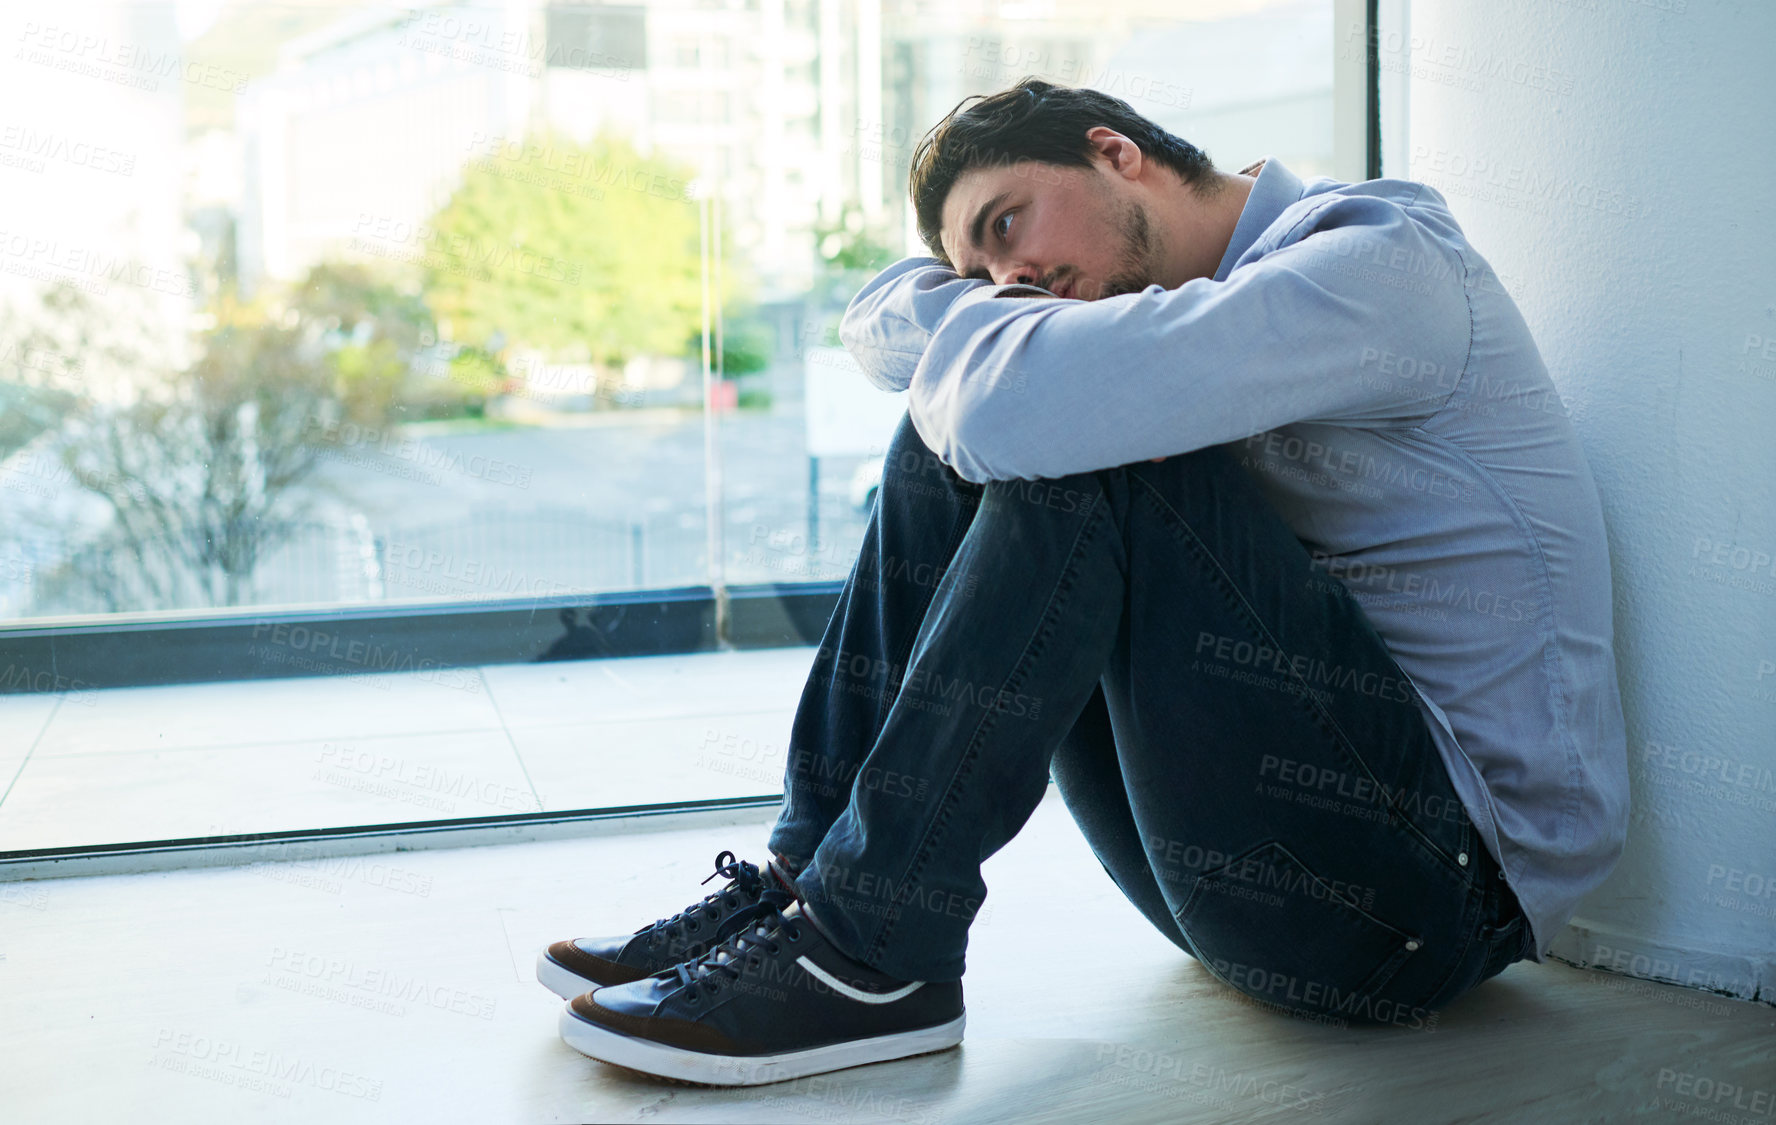 Buy stock photo Shot of a young man suffering from a mental breakdown